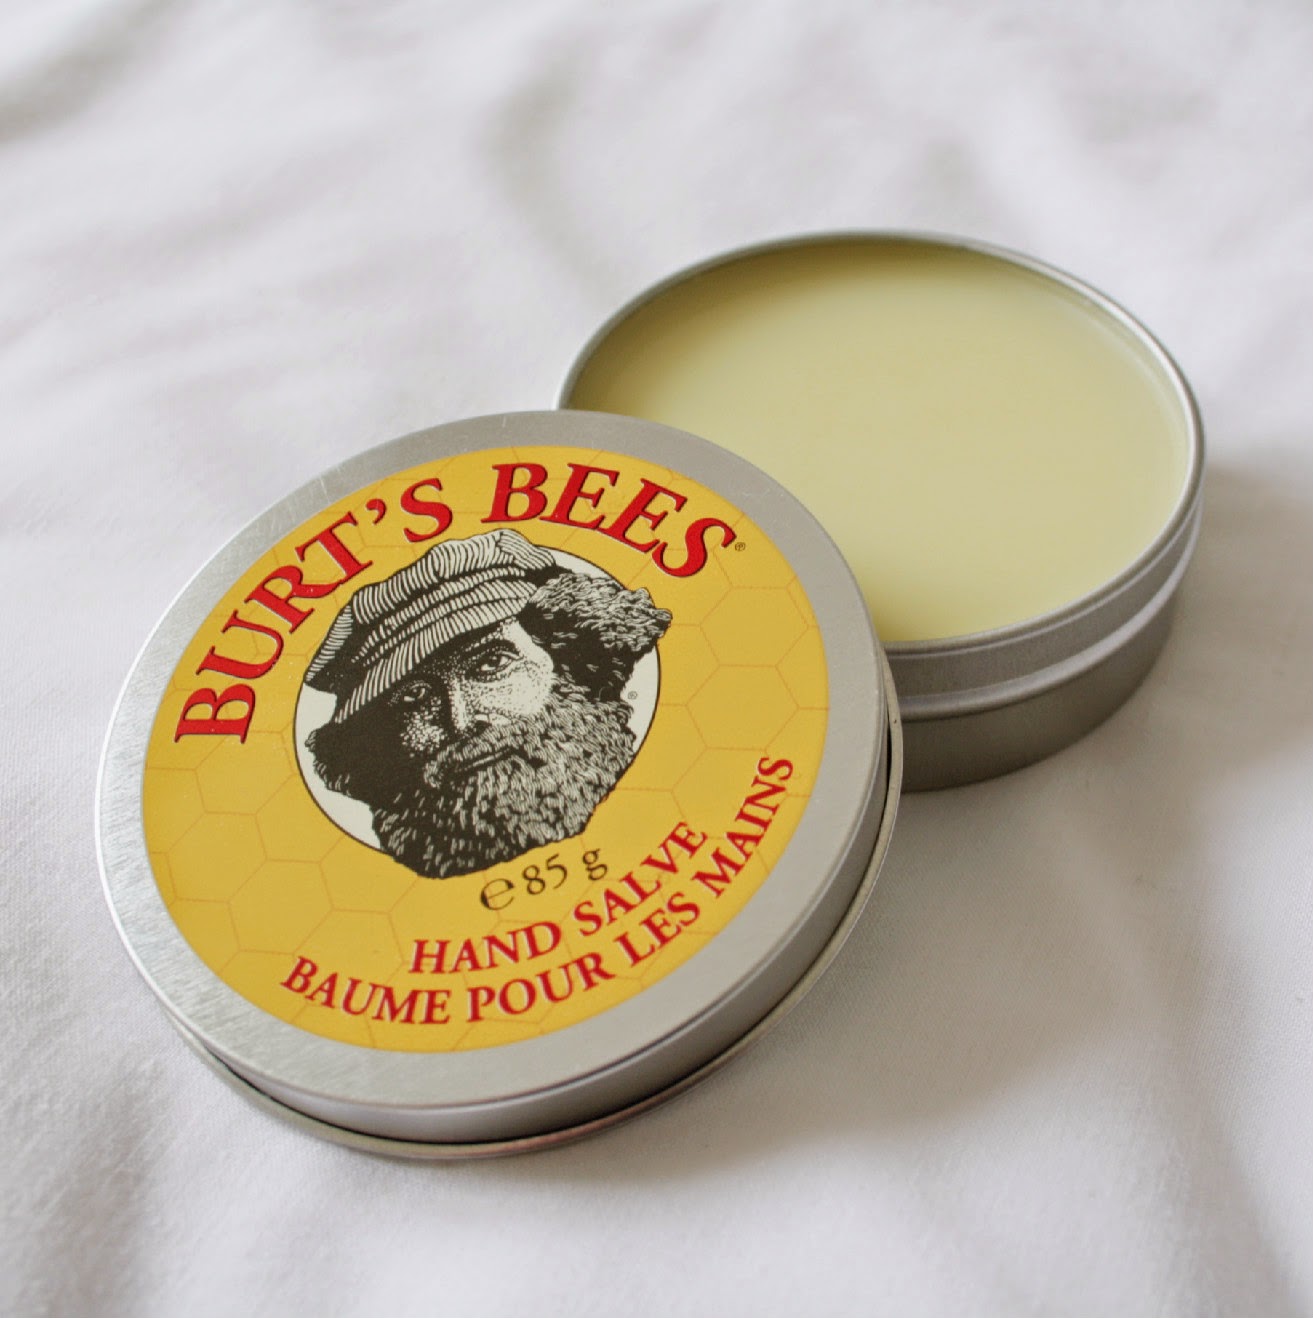 If your hands are in need of some love and moisturisation, look no further than Burt's Bees Hand Salve - it's super dense so can soften even the roughest of hands!